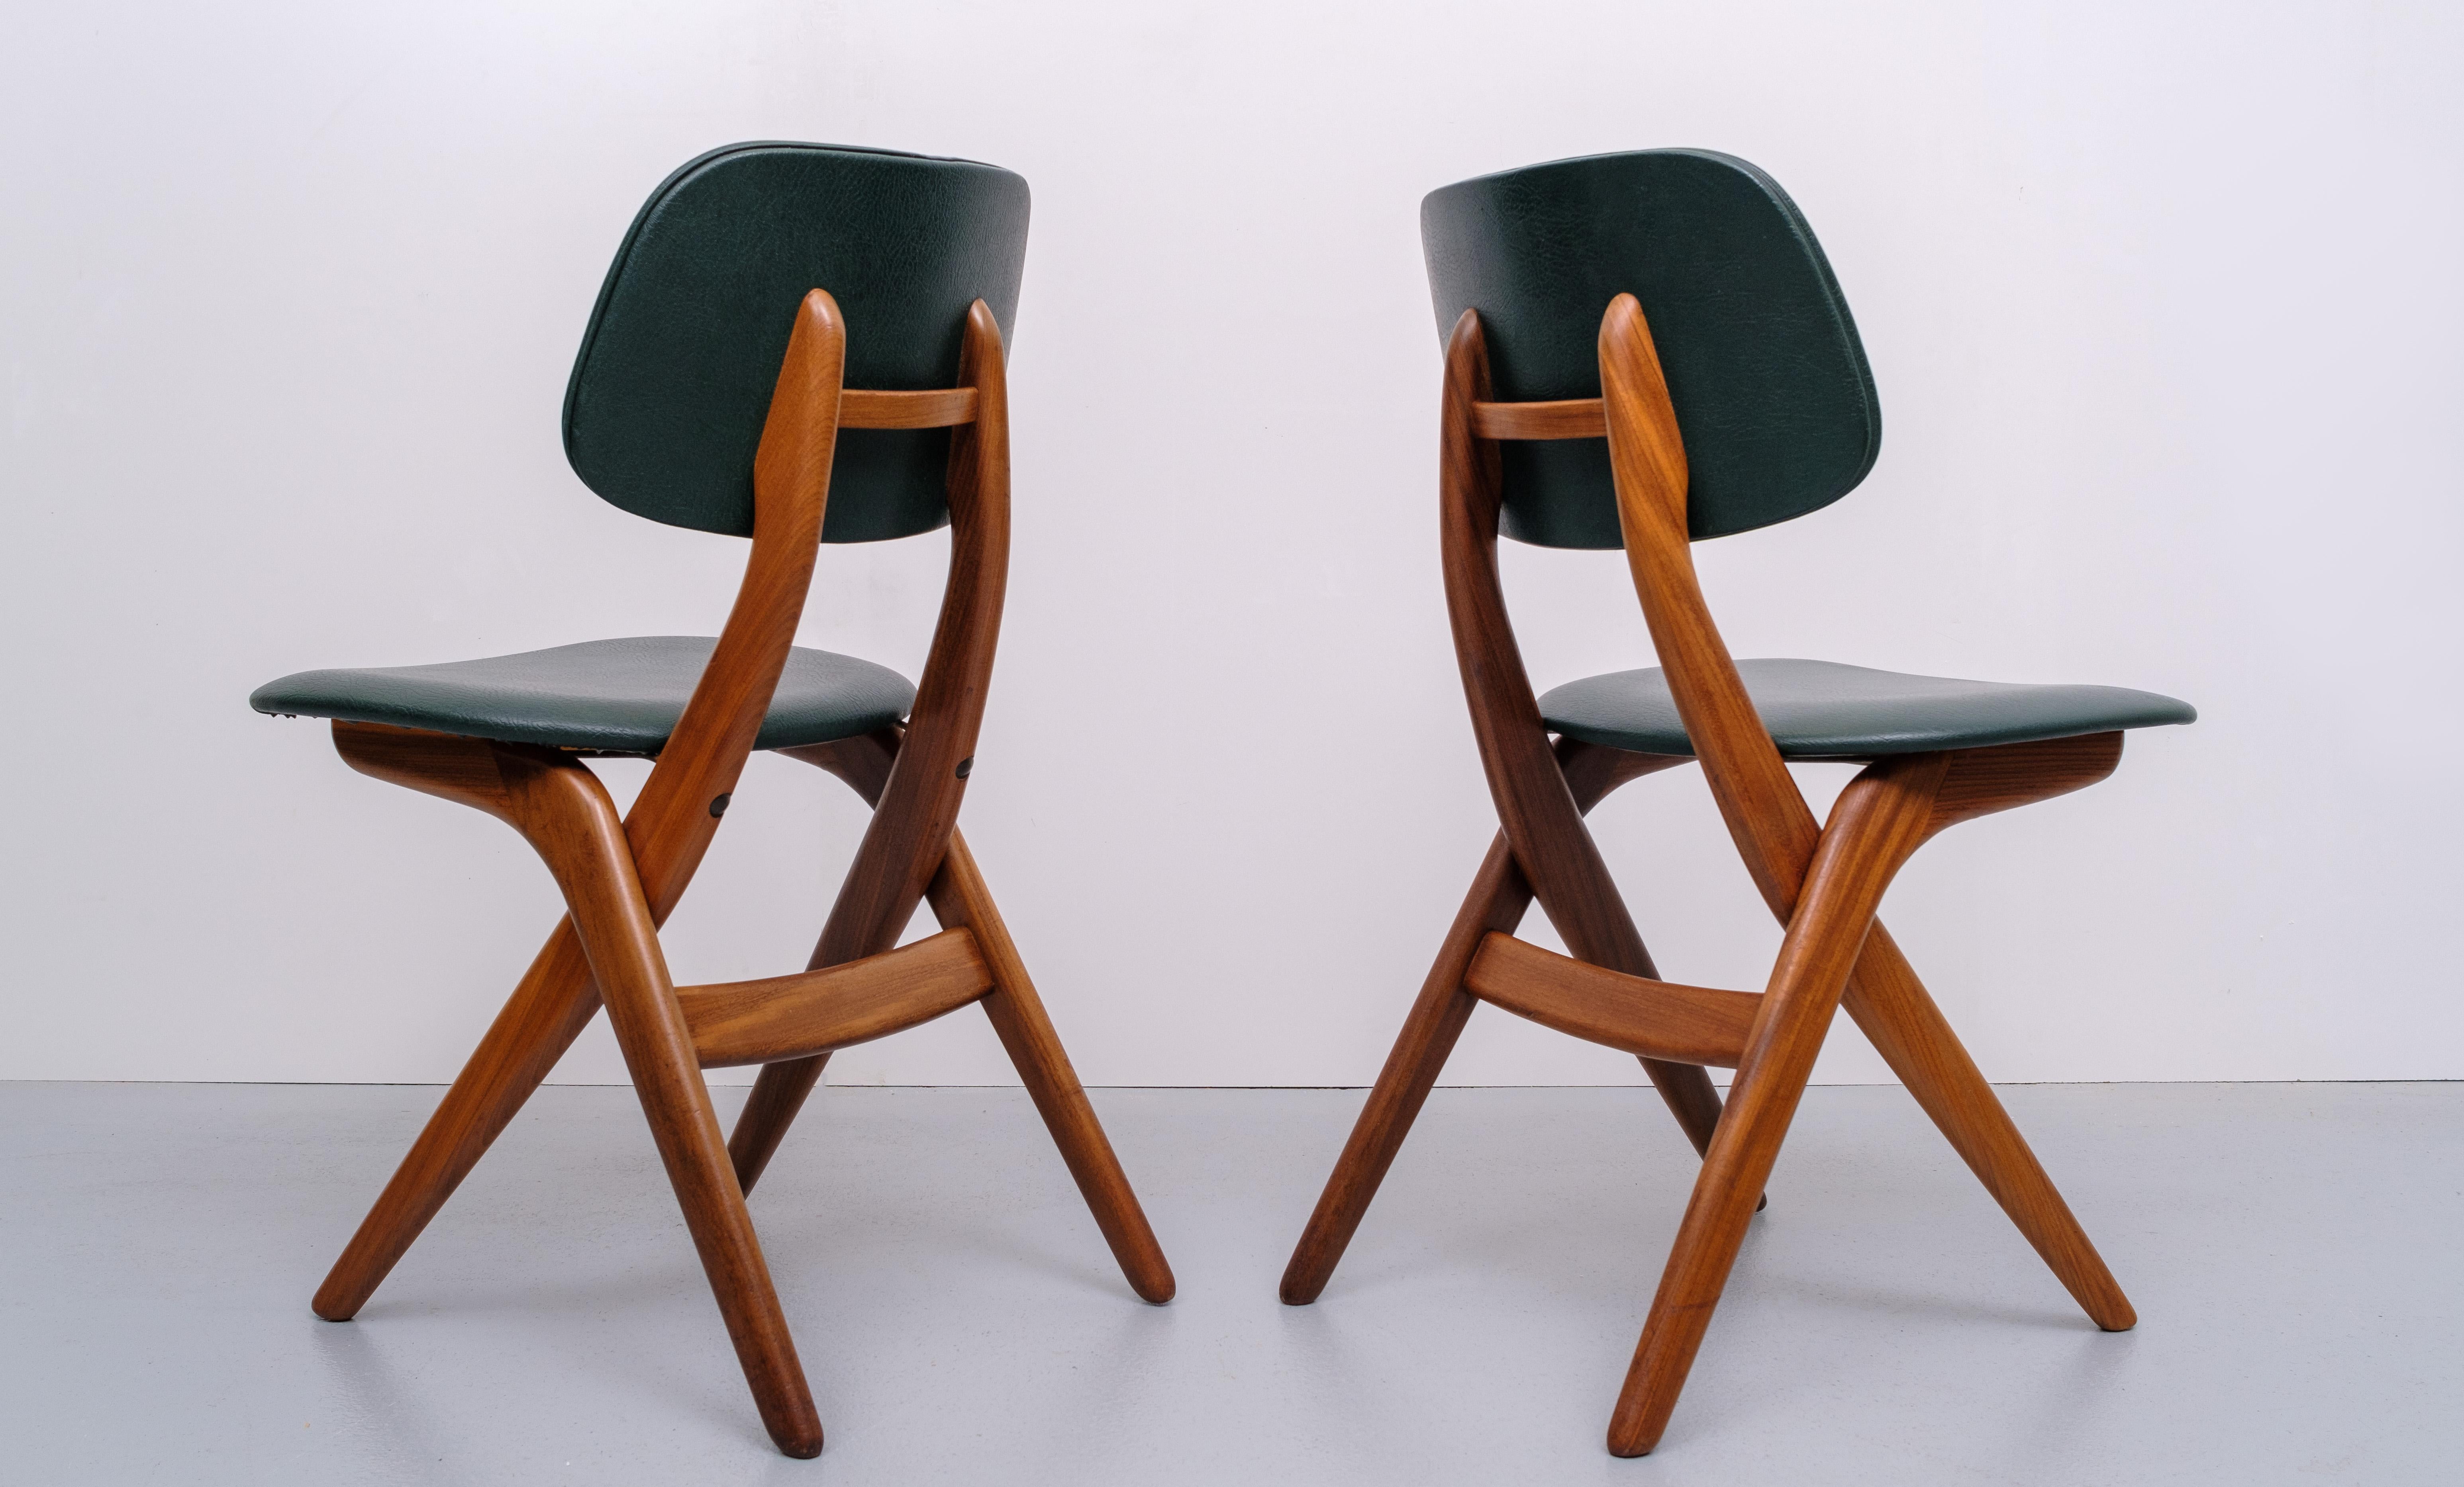 Set of 2 dining chairs, designed by Louis van Teeffelen for Webe in Netherlands. The model features front legs which move up into the backrest while crossing the rear legs - this 'crossed wood' design was a specialty of Van Teeffelen. Frame is made